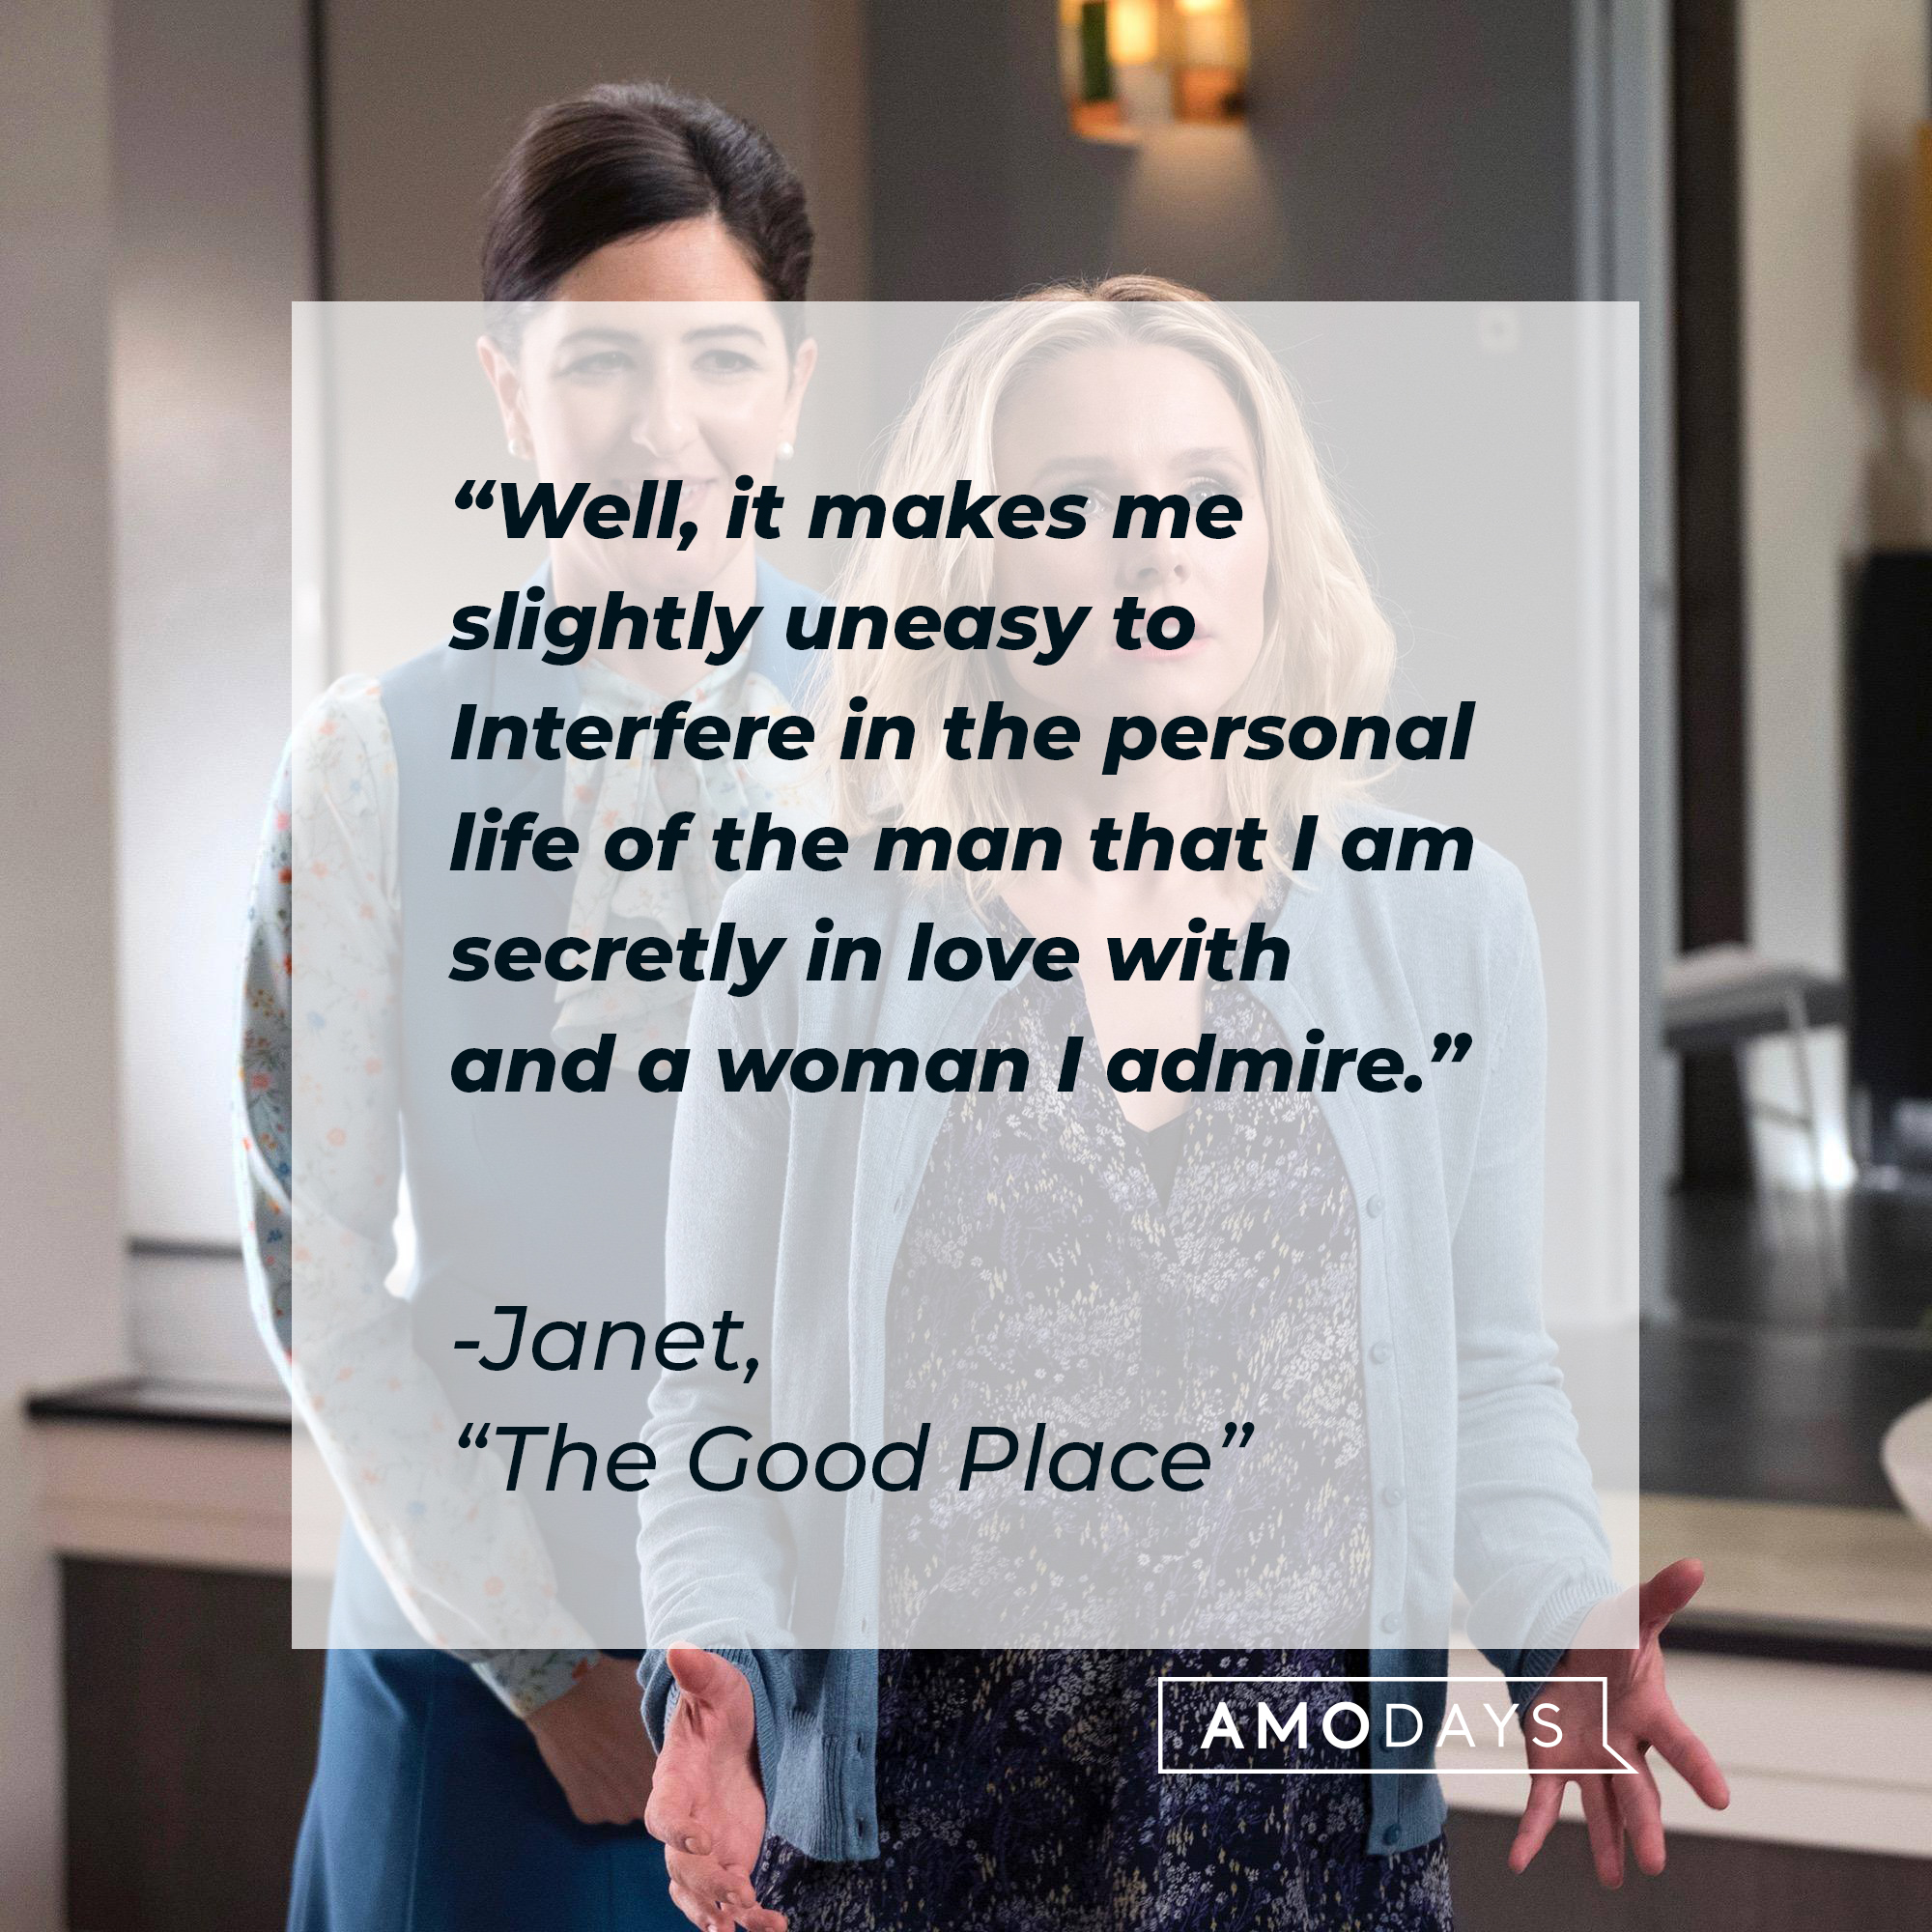 Janet's quote: "Well, it makes me slightly uneasy to Interfere in the personal life of the man that I am secretly in love with and a woman I admire.” | Source: facebook.com/NBCTheGoodPlace